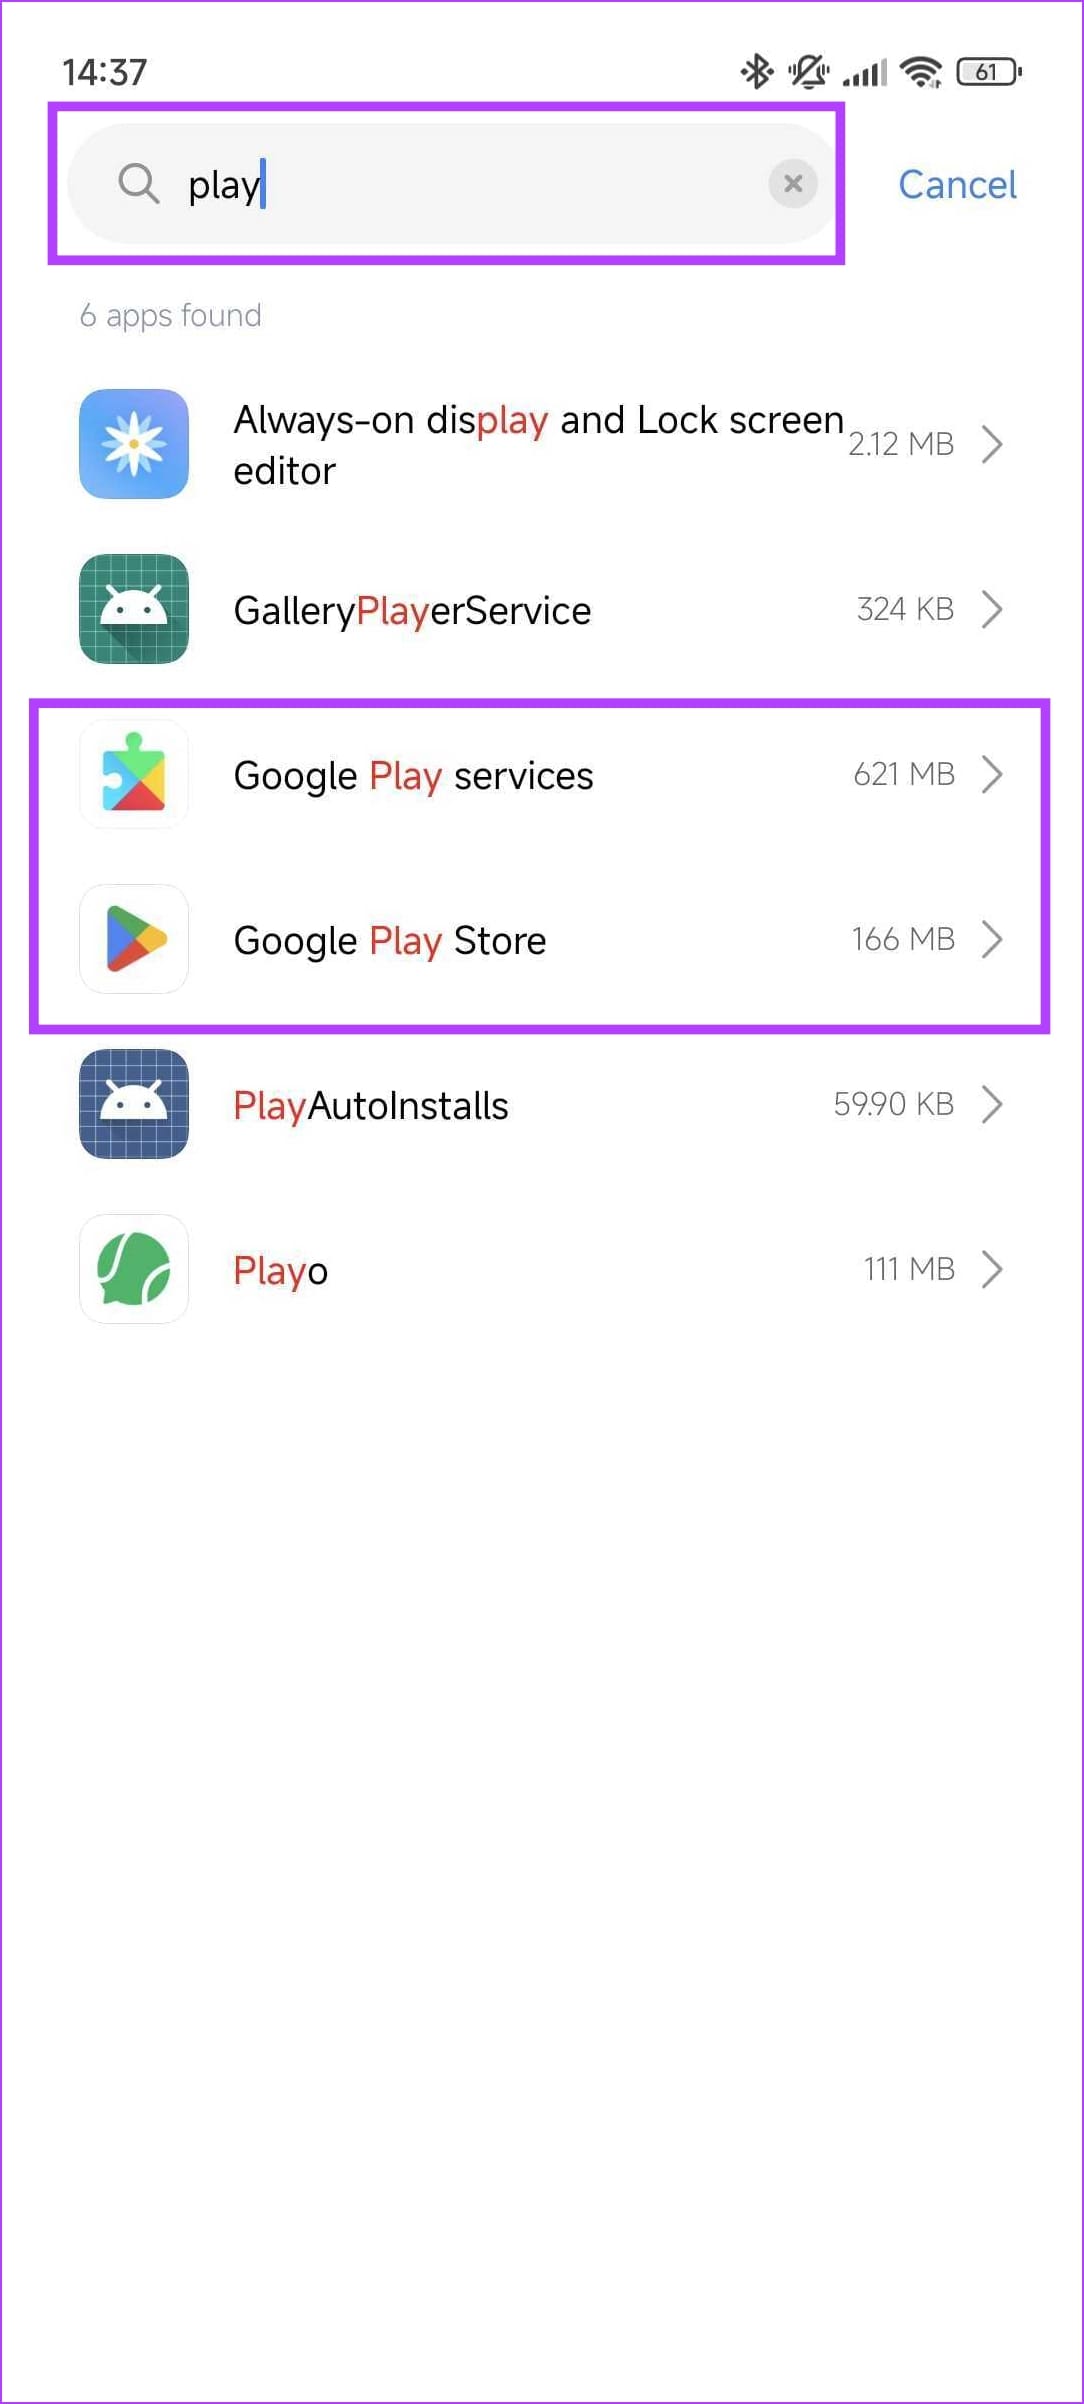 Search for Google Play